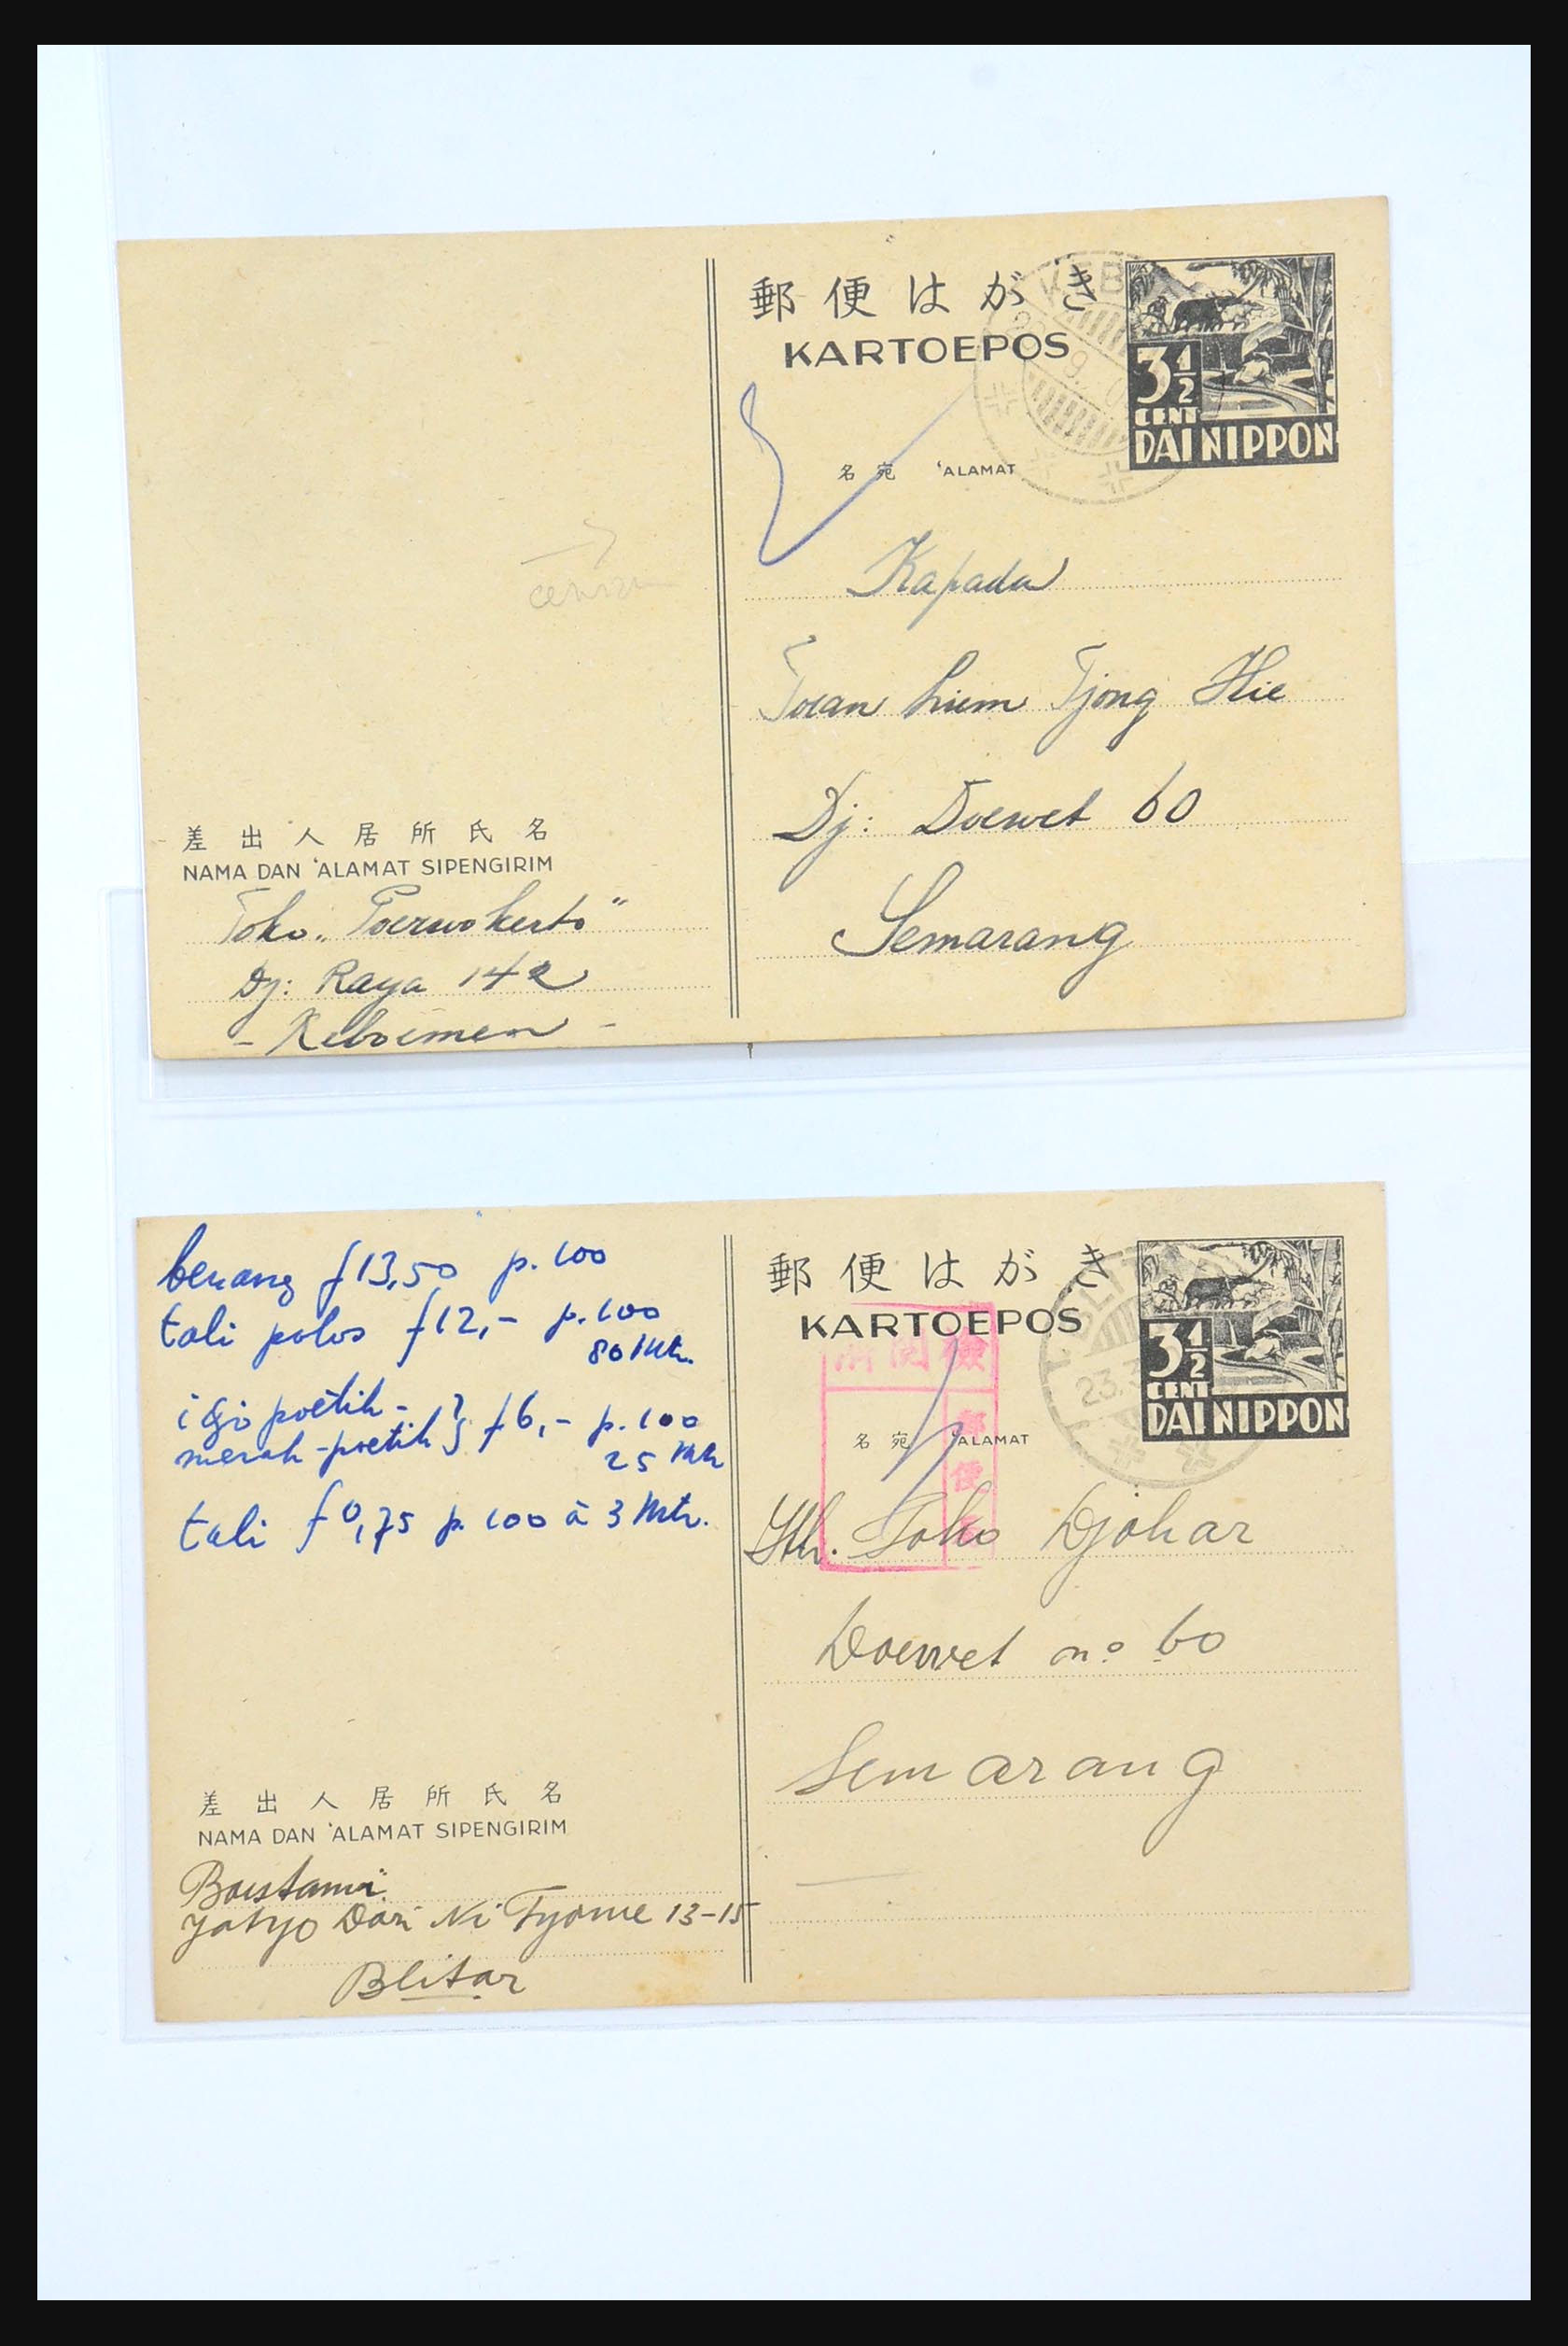 31362 002 - 31362 Netherlands Indies Japanese occupation covers 1942-1945.